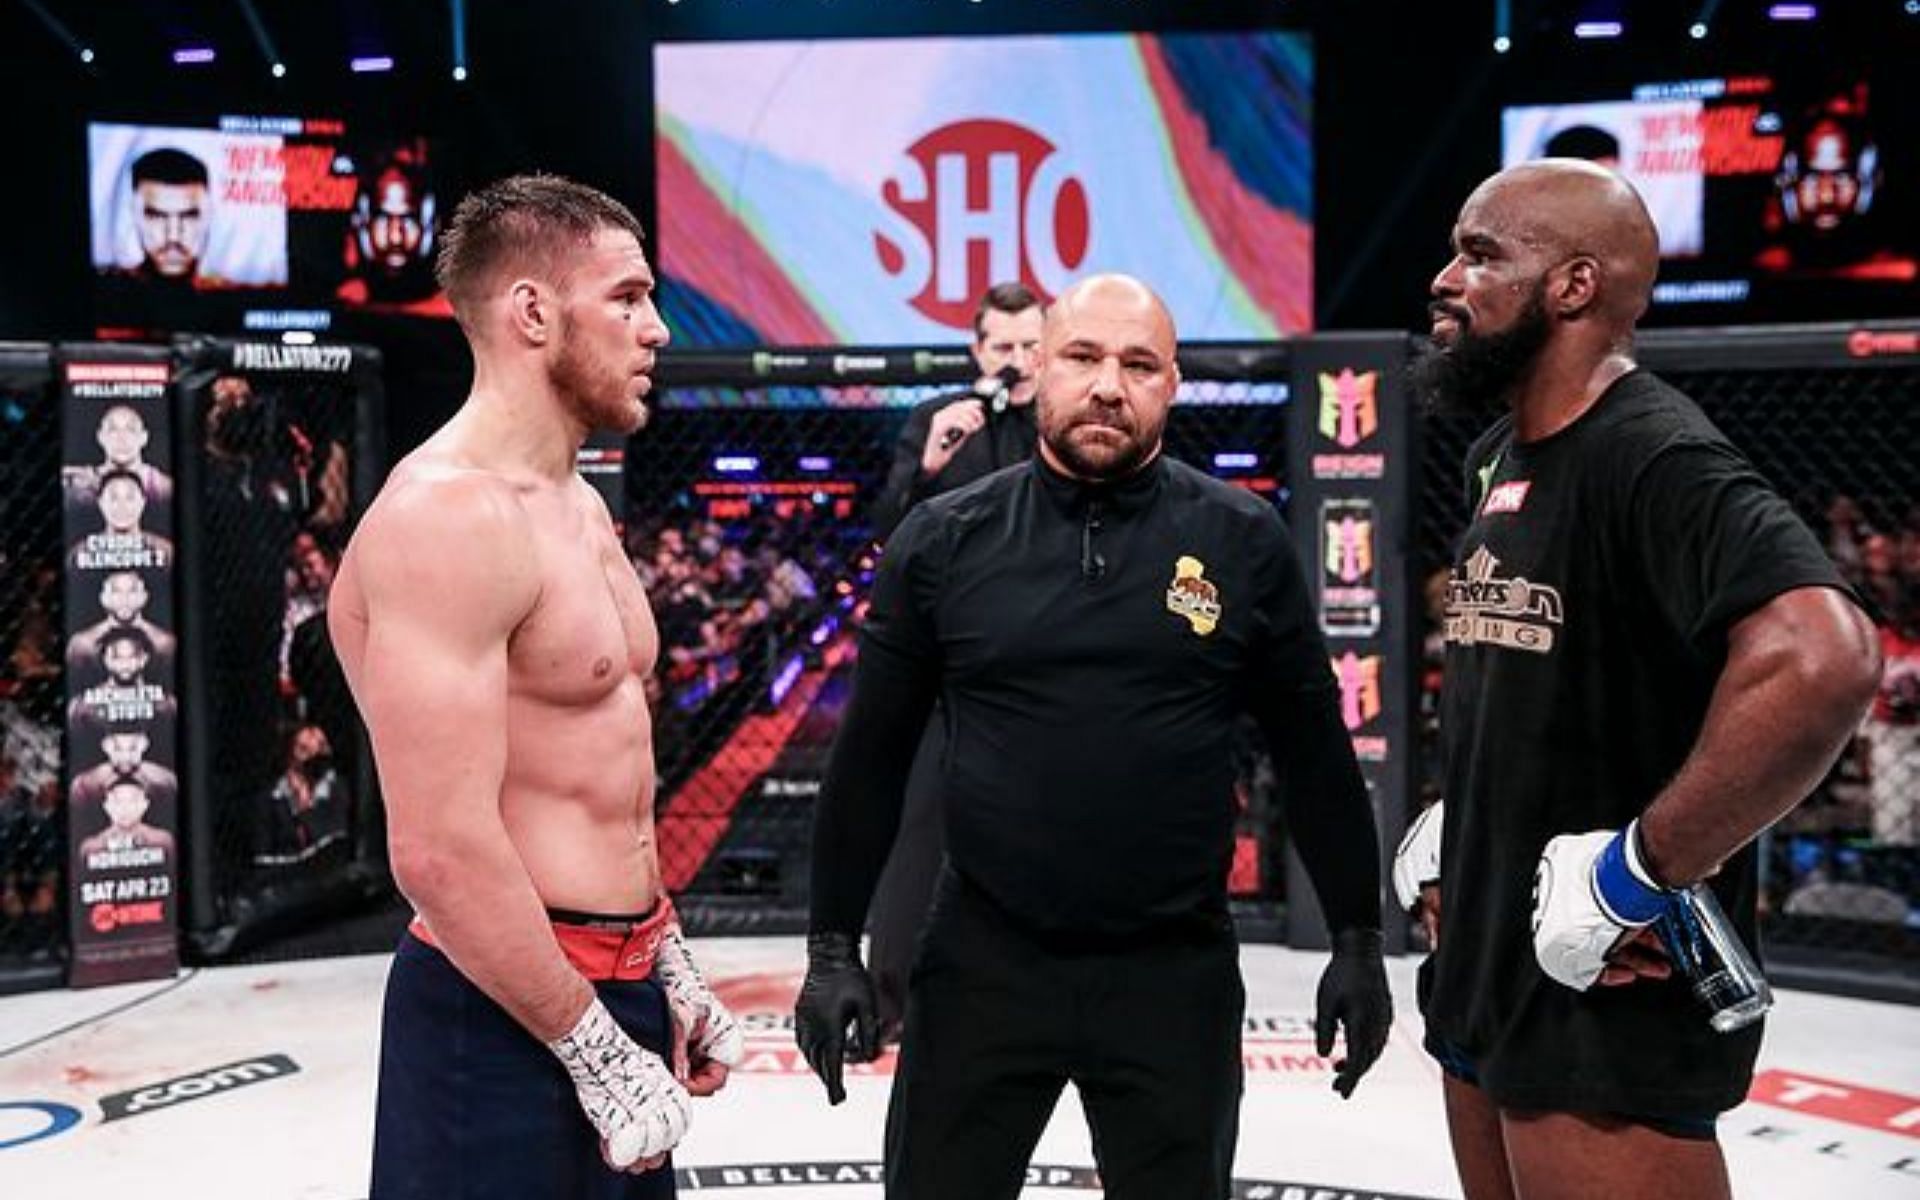 Vadim Nemkov (left) and Corey Anderson (right) after their fight was ruled No Contest. Photo credit: Lucas Noonan/BellatorMMA